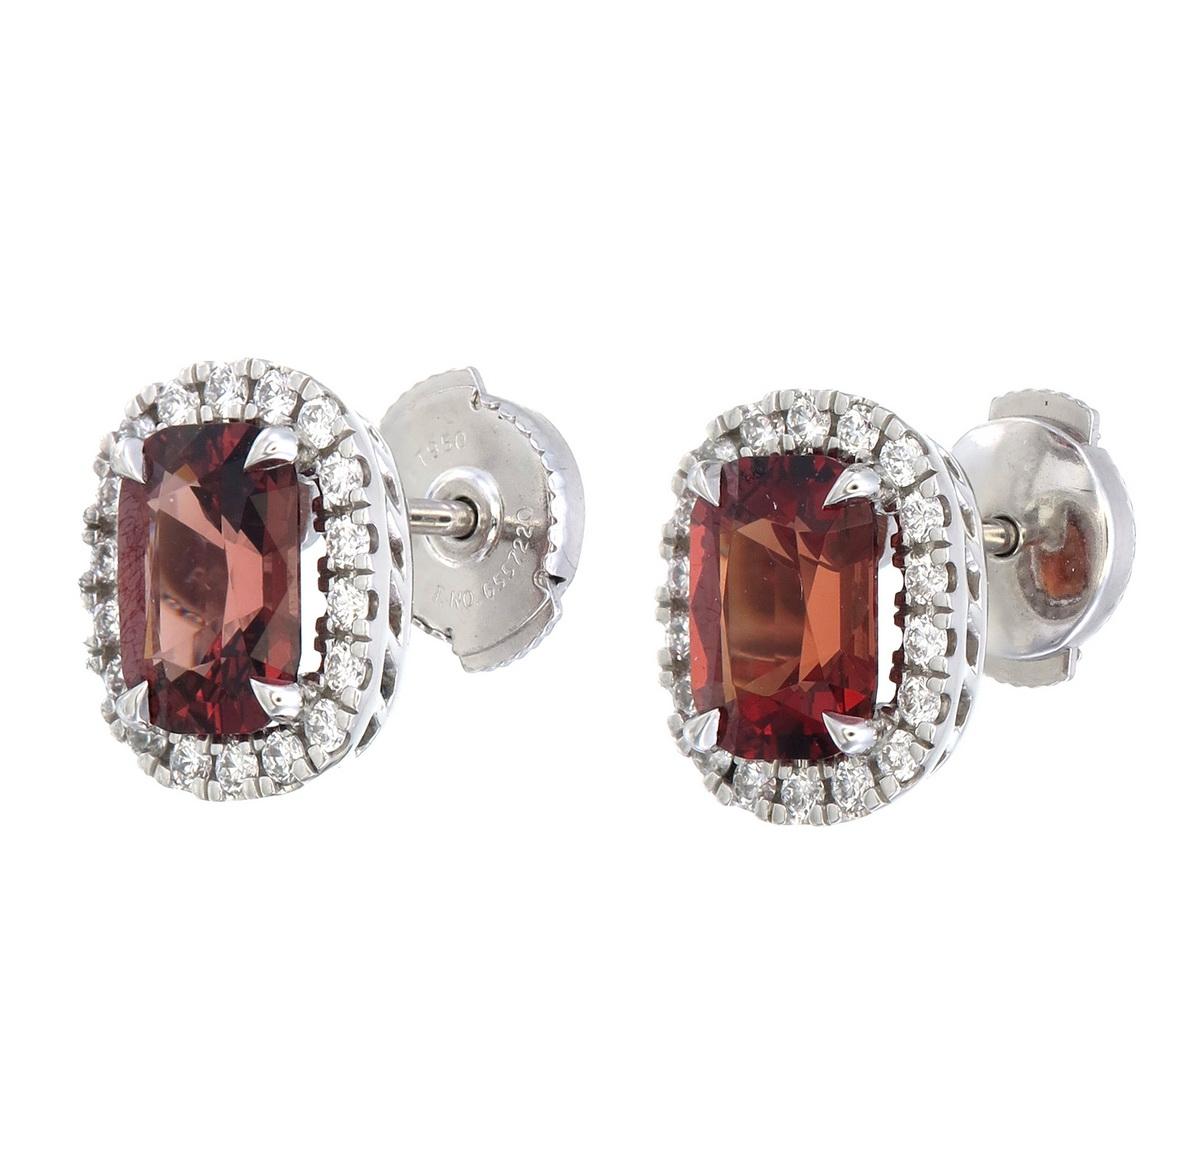 Orloff of Denmark;

With firm fire and silvery brilliance, these two Orange Spinels make a fine pair of earrings, being embezzled with a crown of wonderful VS1, G-H Diamonds.

;We here at Orloff of Denmark are more than happy to present this fine